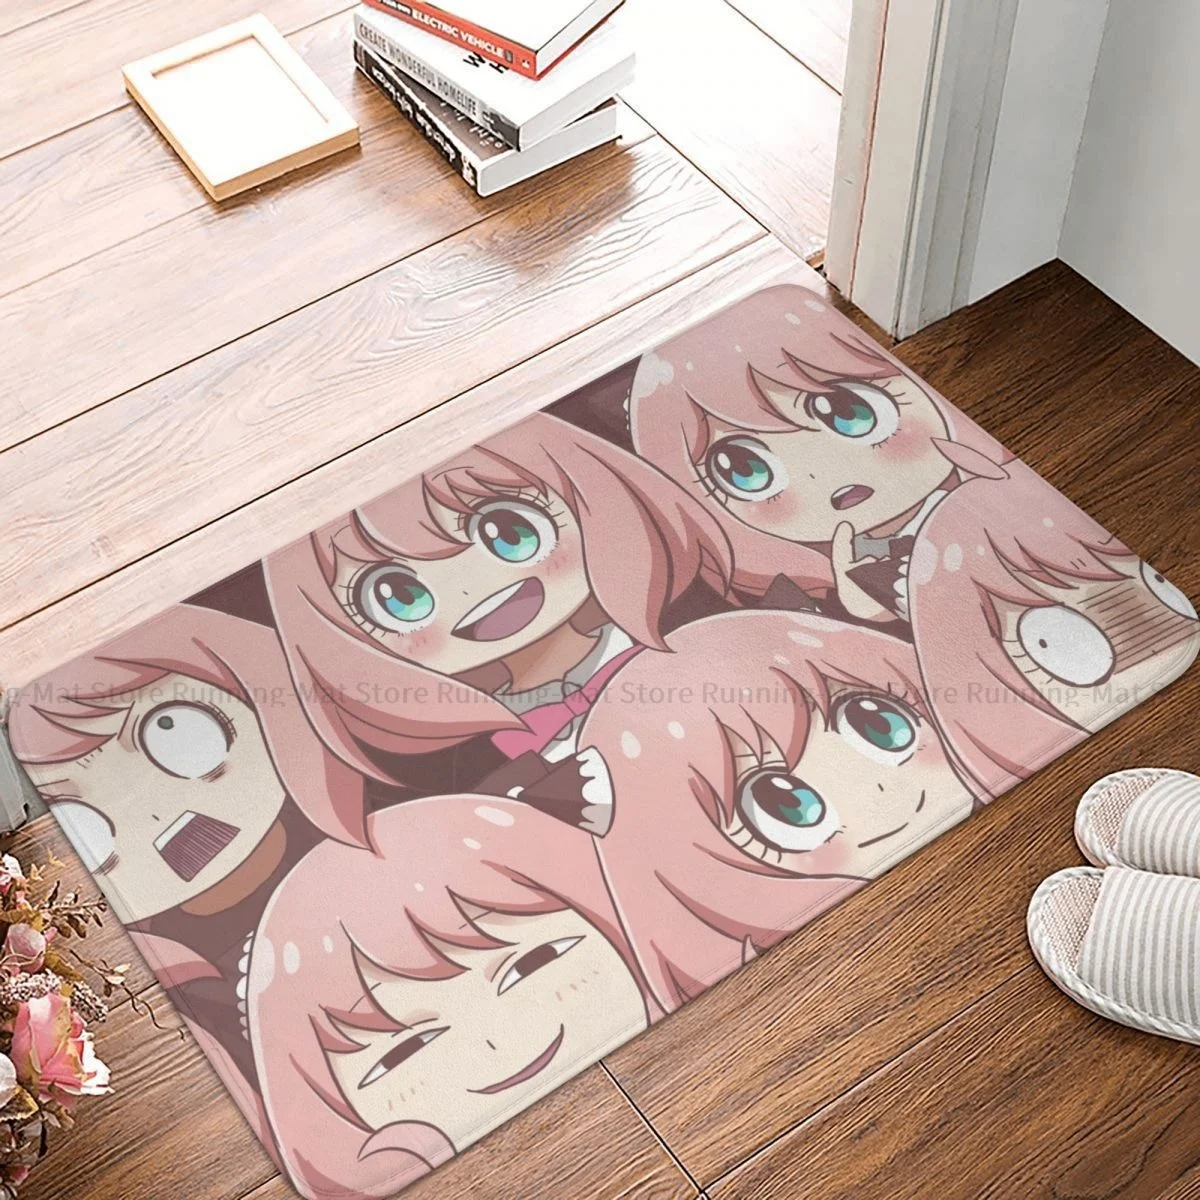 

Spy X Family Anime Kitchen Non-Slip Carpet Anya Forger Face Kawaii Living Room Mat Welcome Doormat Floor Decoration Rug